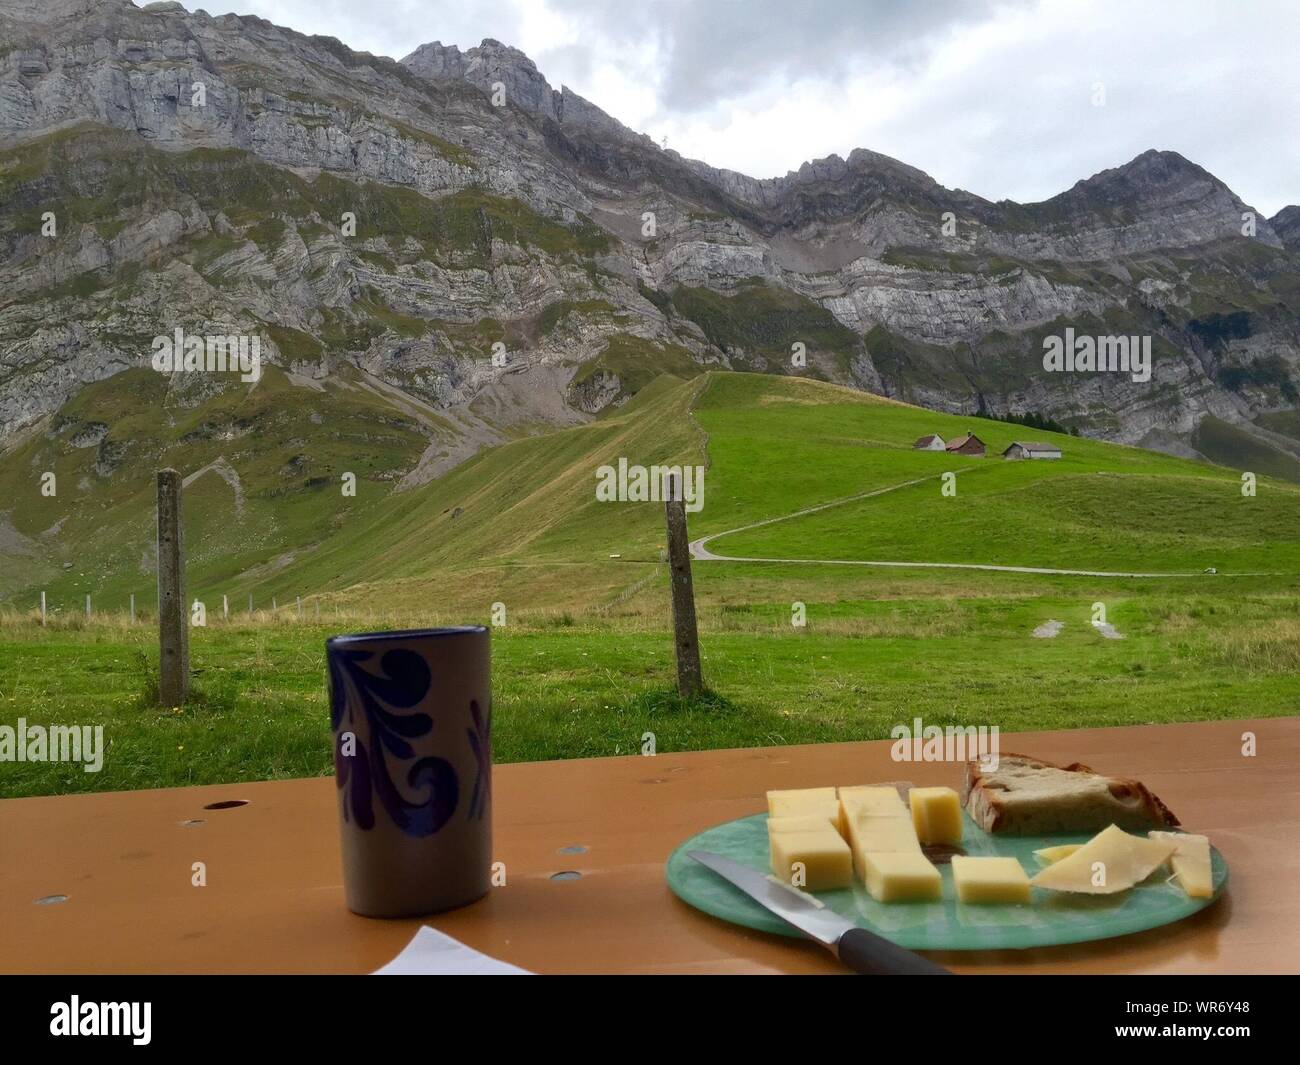 View Of Alpstein With Breakfast In Foreground Stock Photo